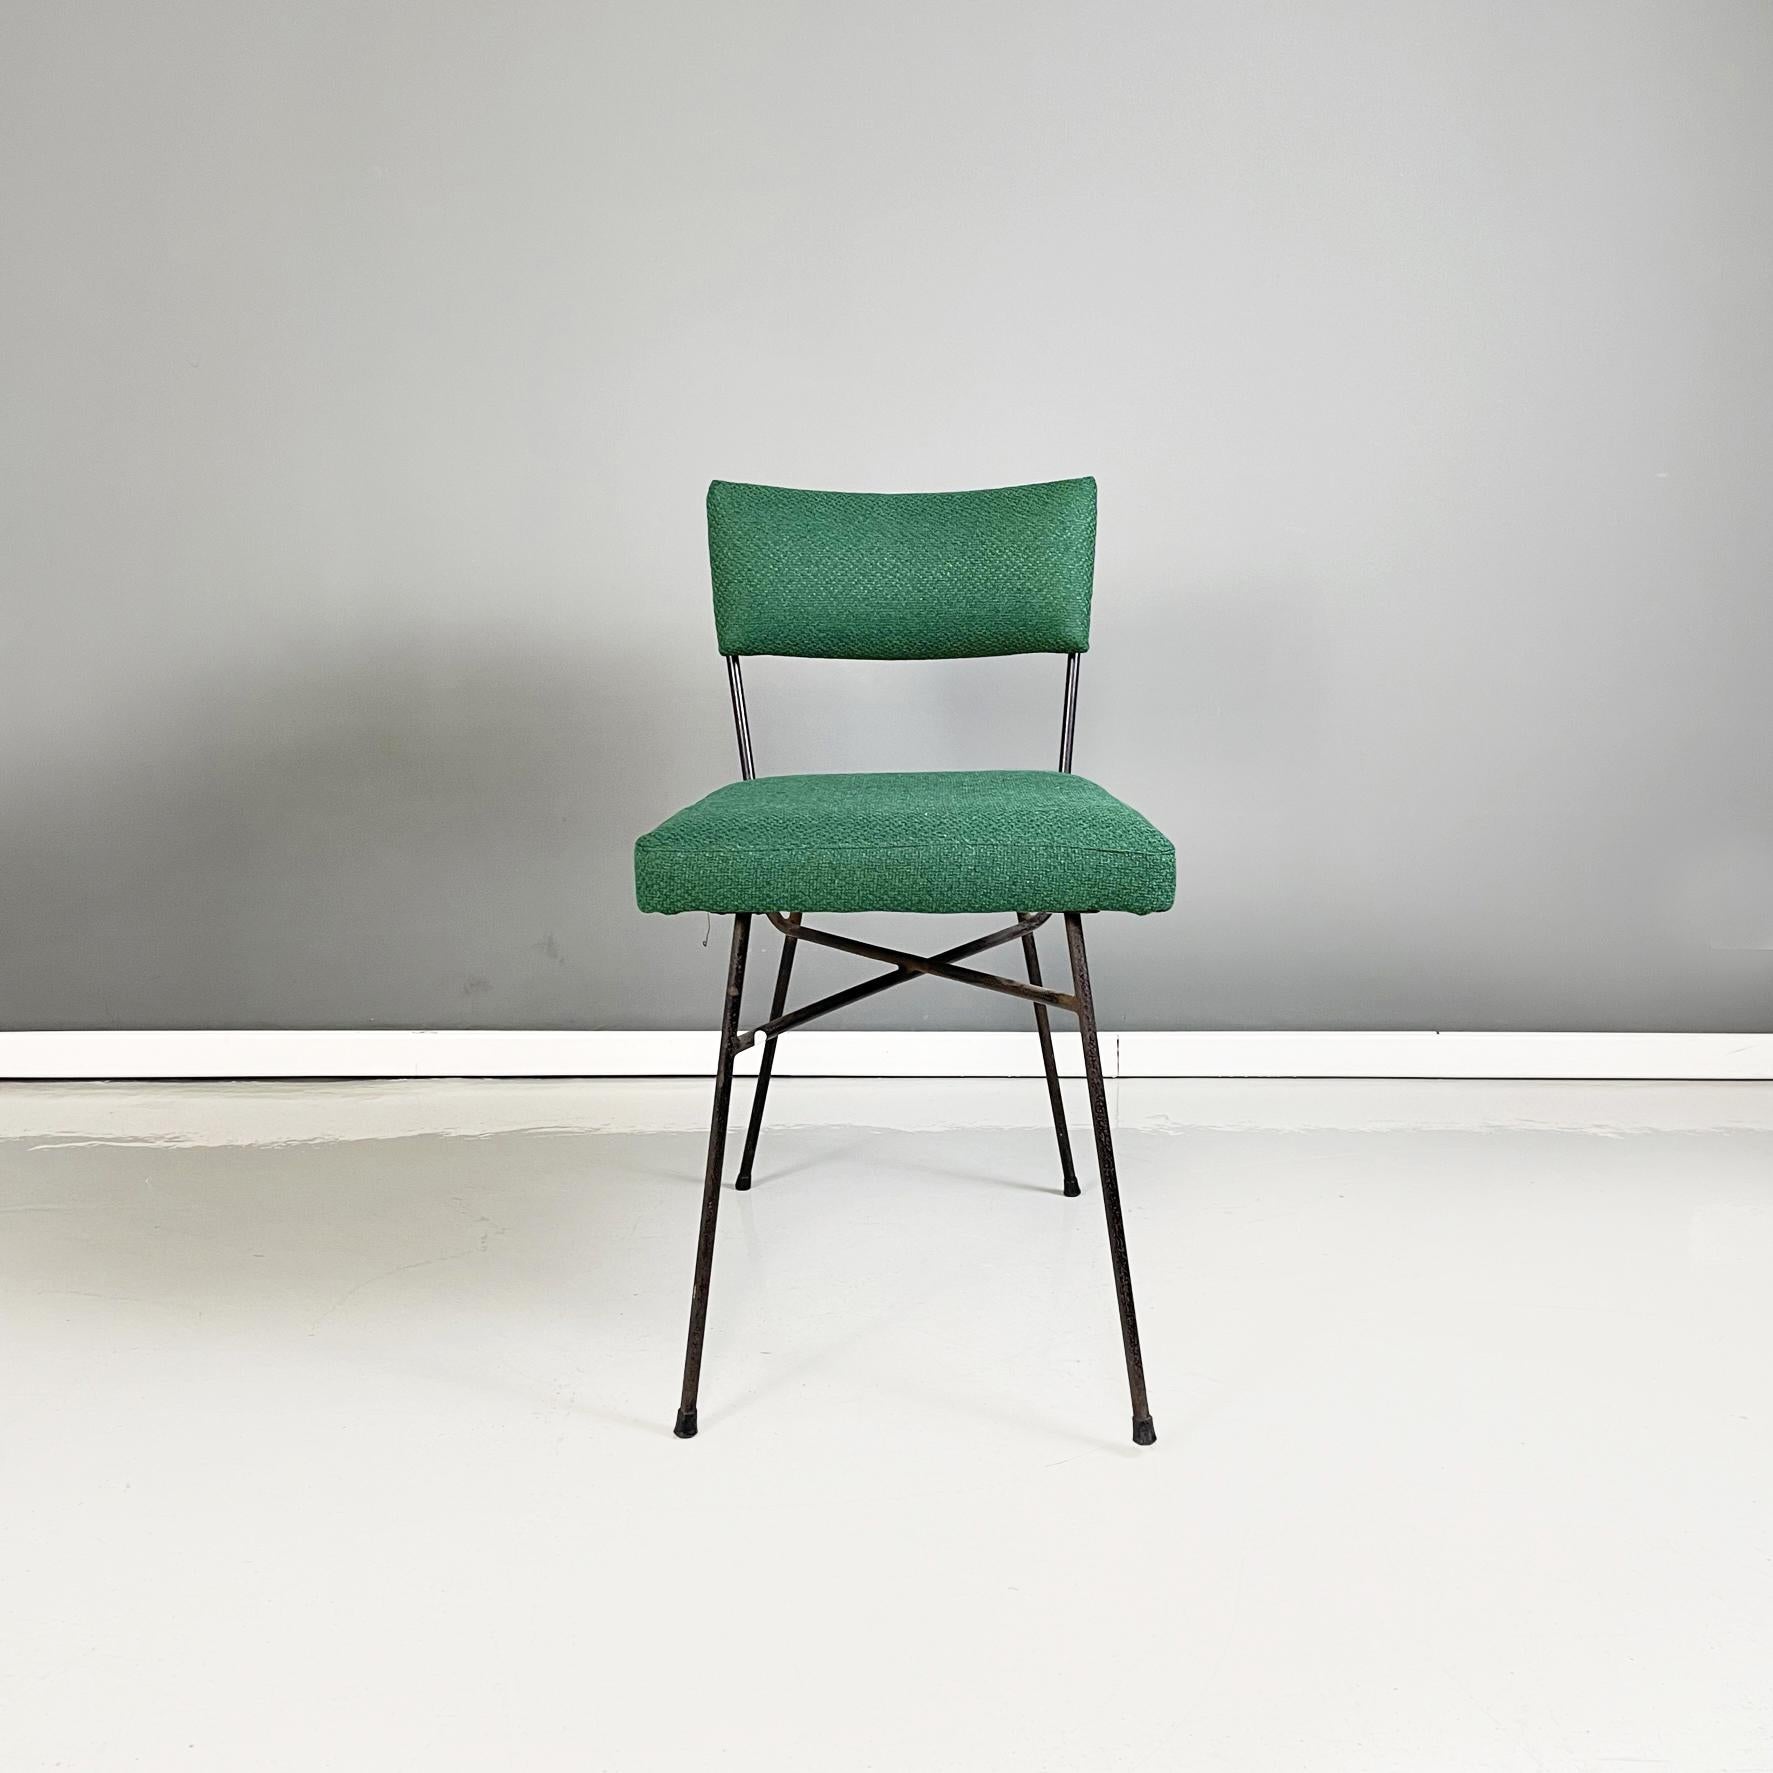 Italian mid-century green fabric chair mod. Elettra by Studio BBPR for Arflex, 1960s
Chair mod. Elettra with squared seat and curved rectangular back in forest green fabric. The structure is in black painted metal rod.
Produced by Arflex in 1960s